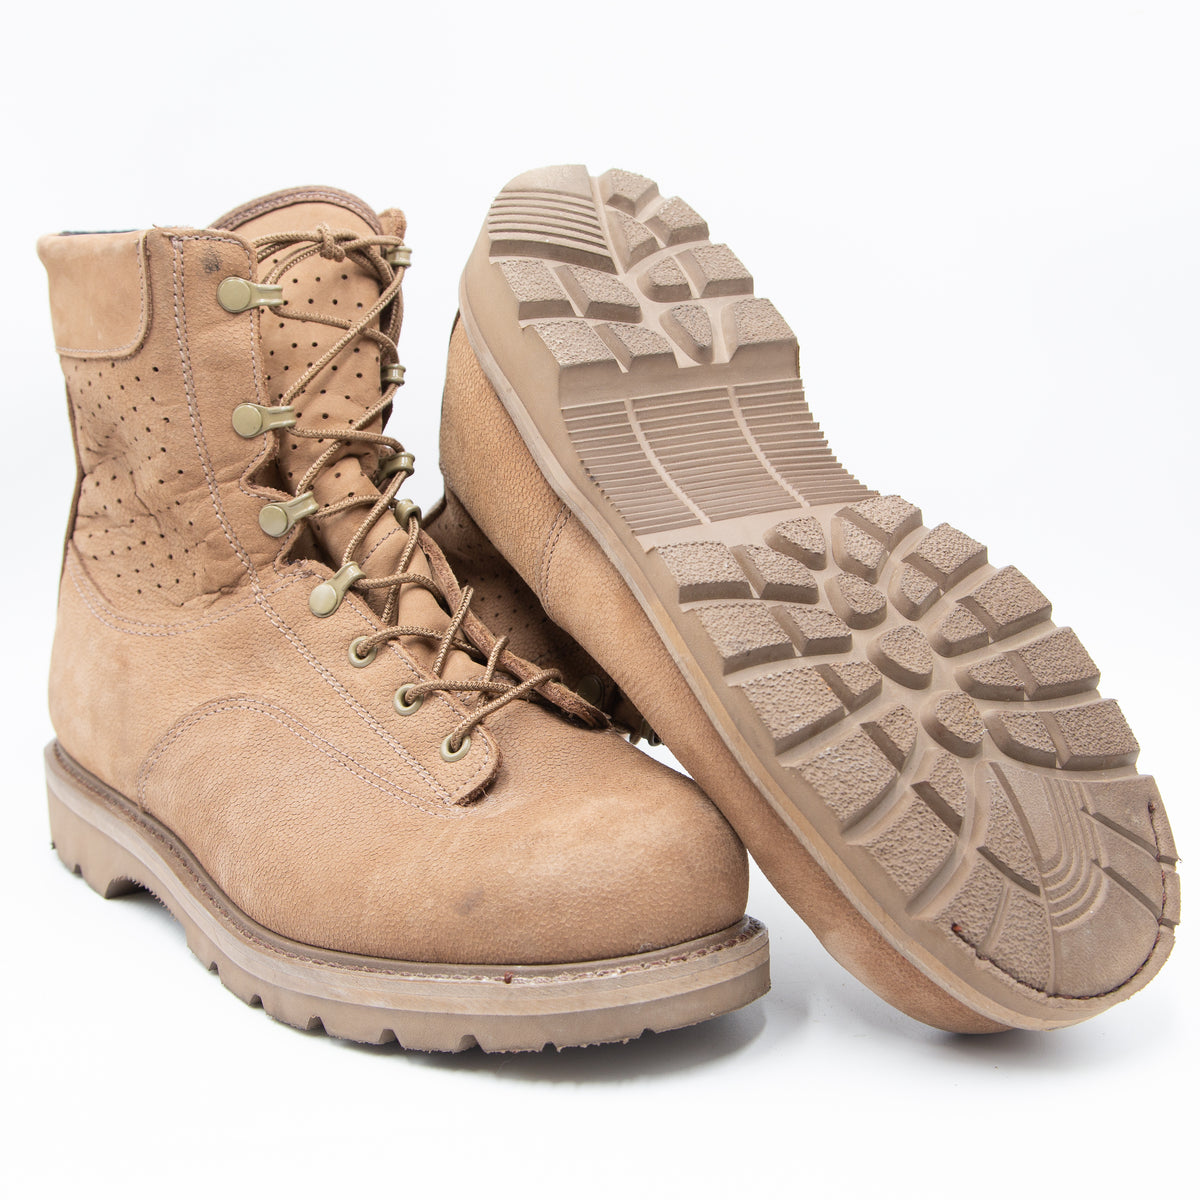 Rare 2000s Vintage Canadian Army Hot Weather Combat Boots ...